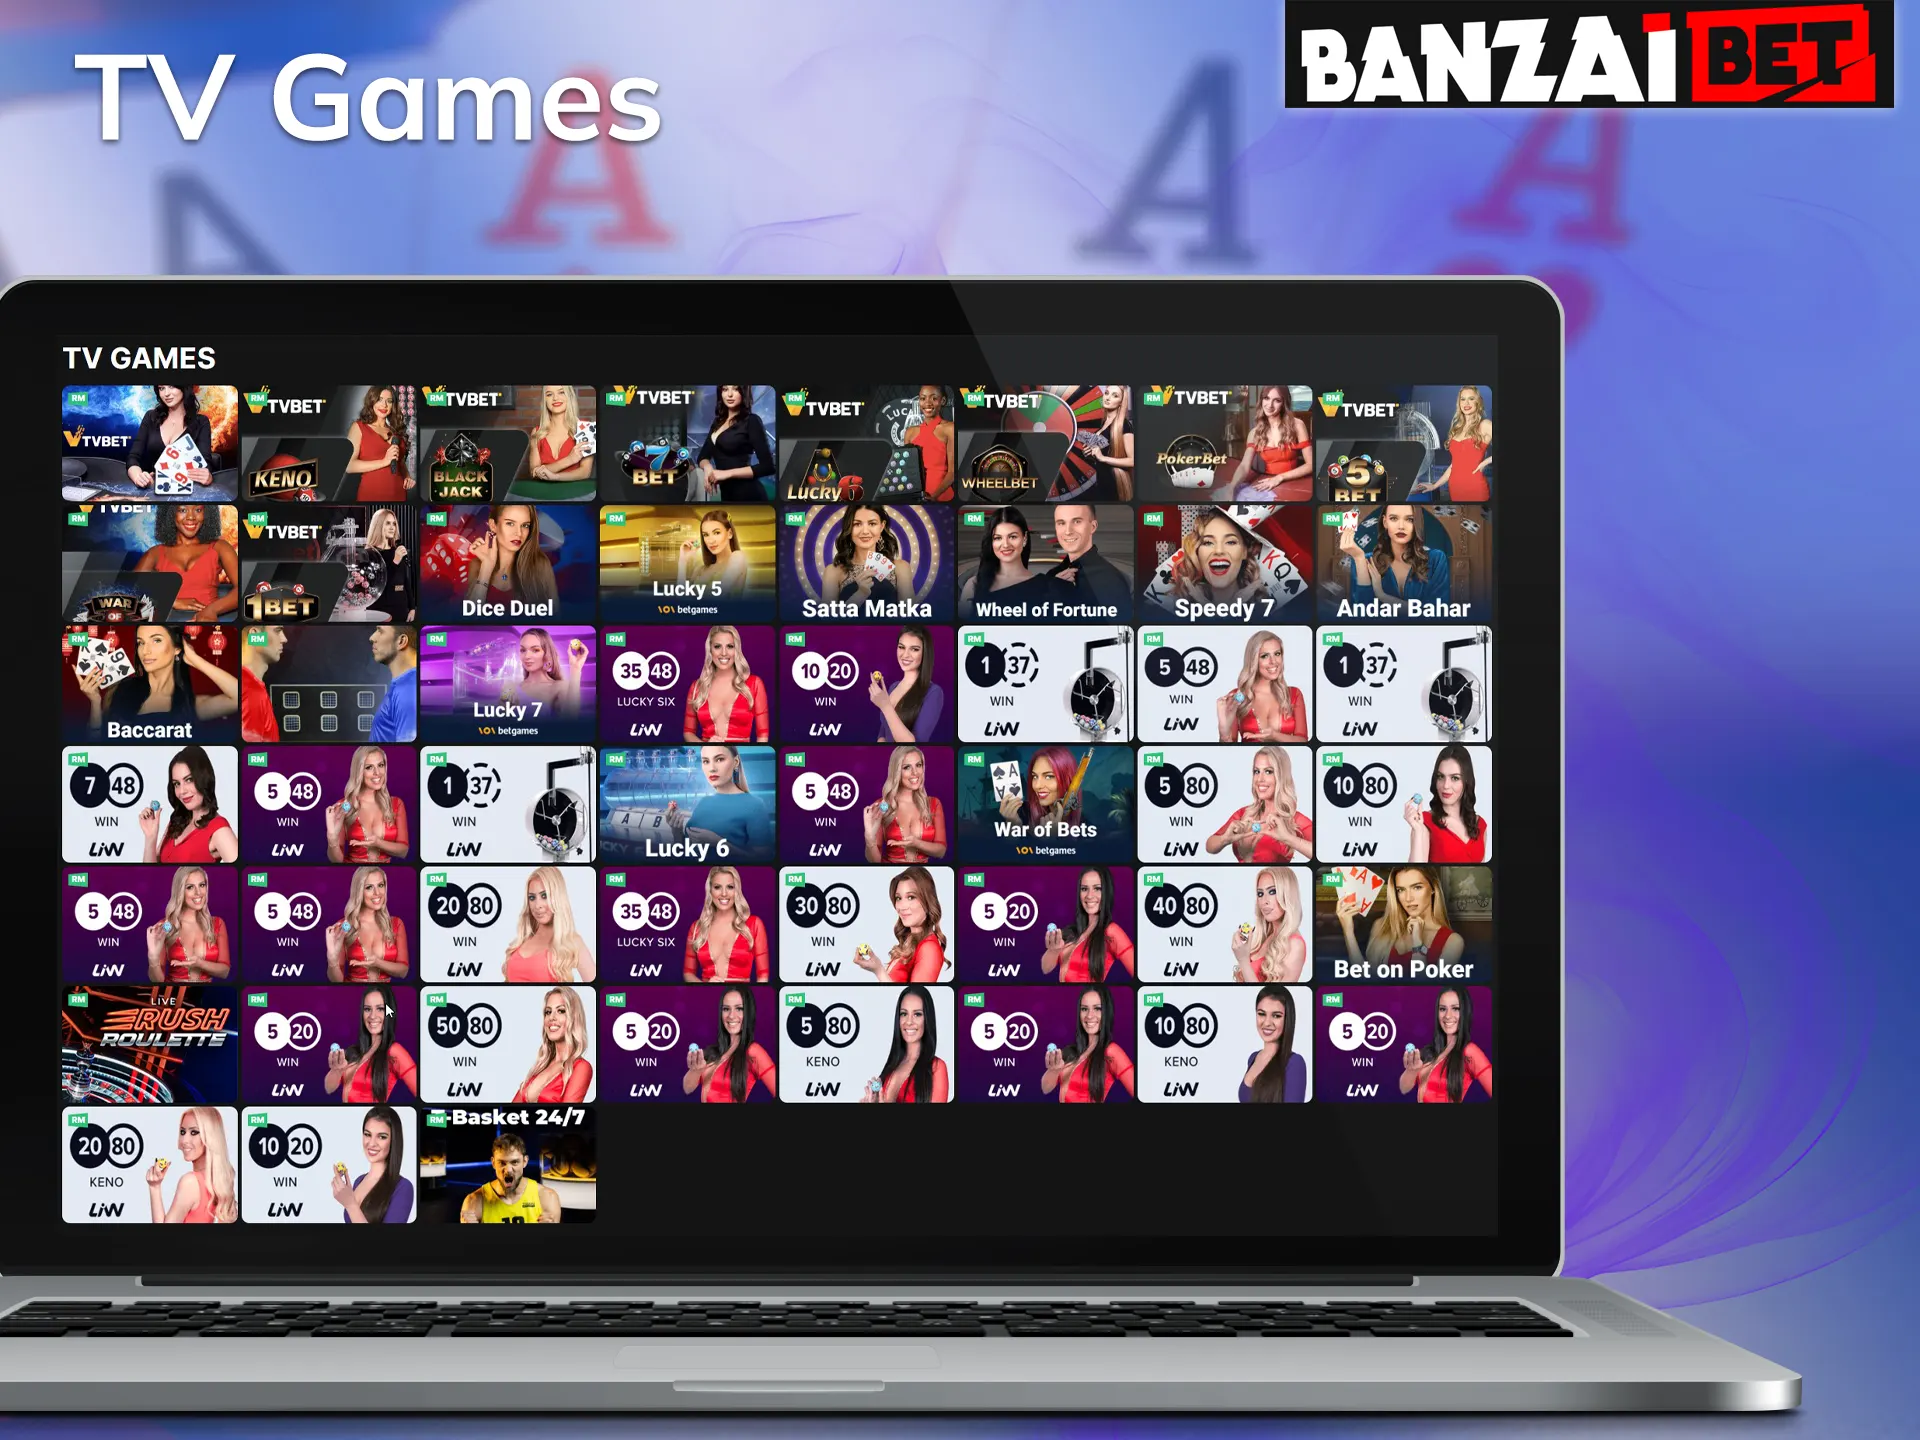 Play your favourite TV Games at the Banzai Bet online casino site.